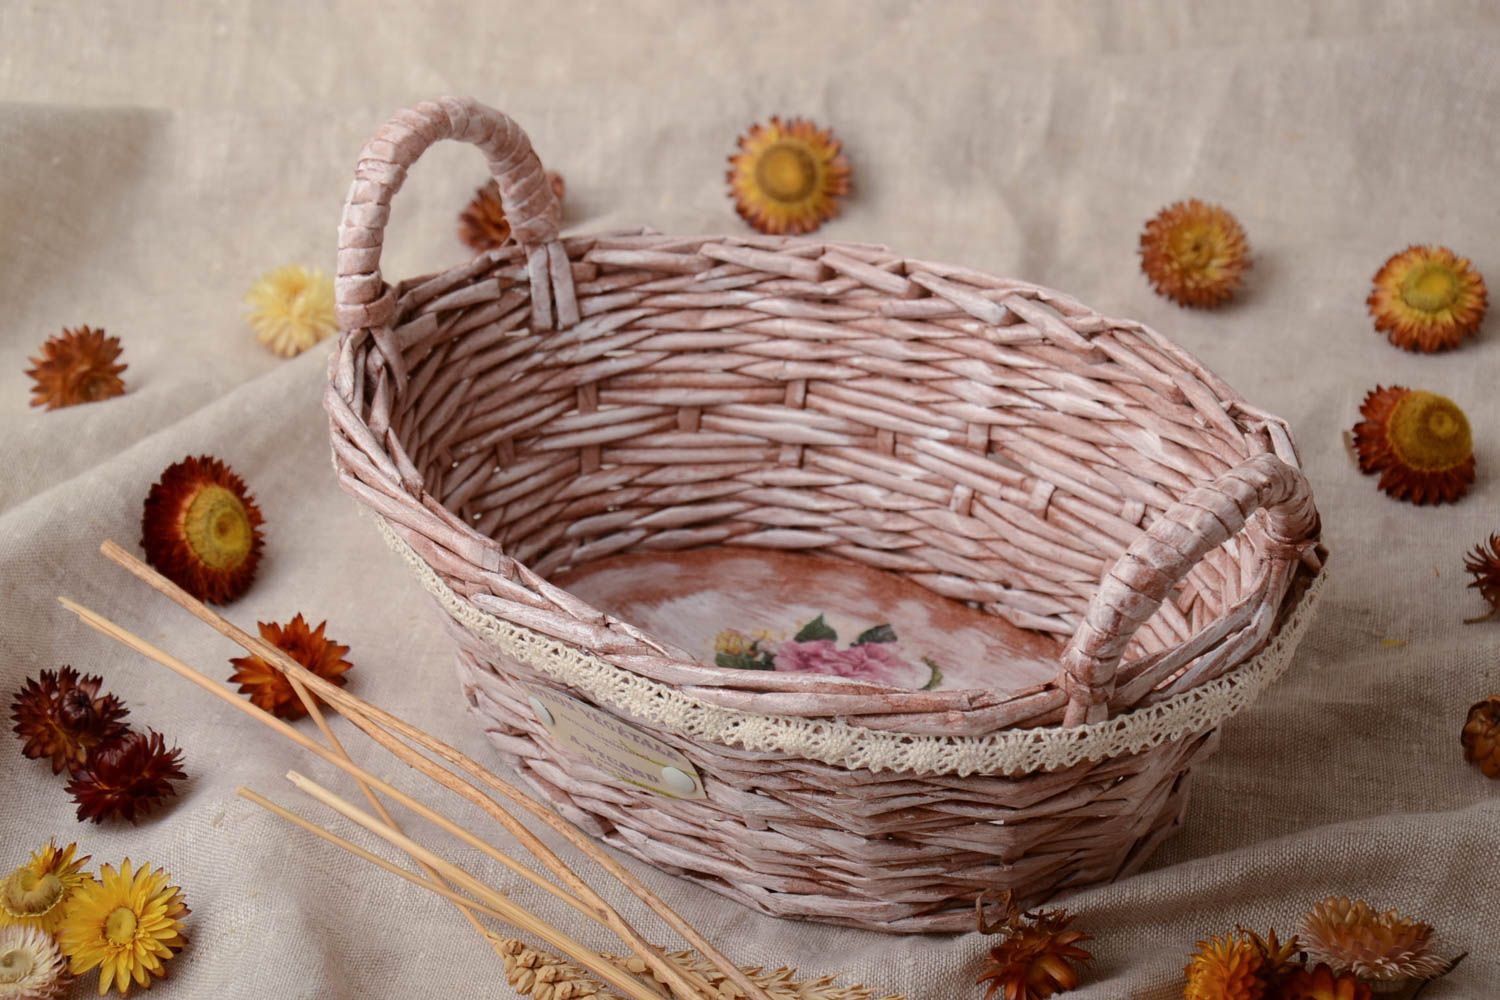 Newspaper basket for bread and fruit photo 1